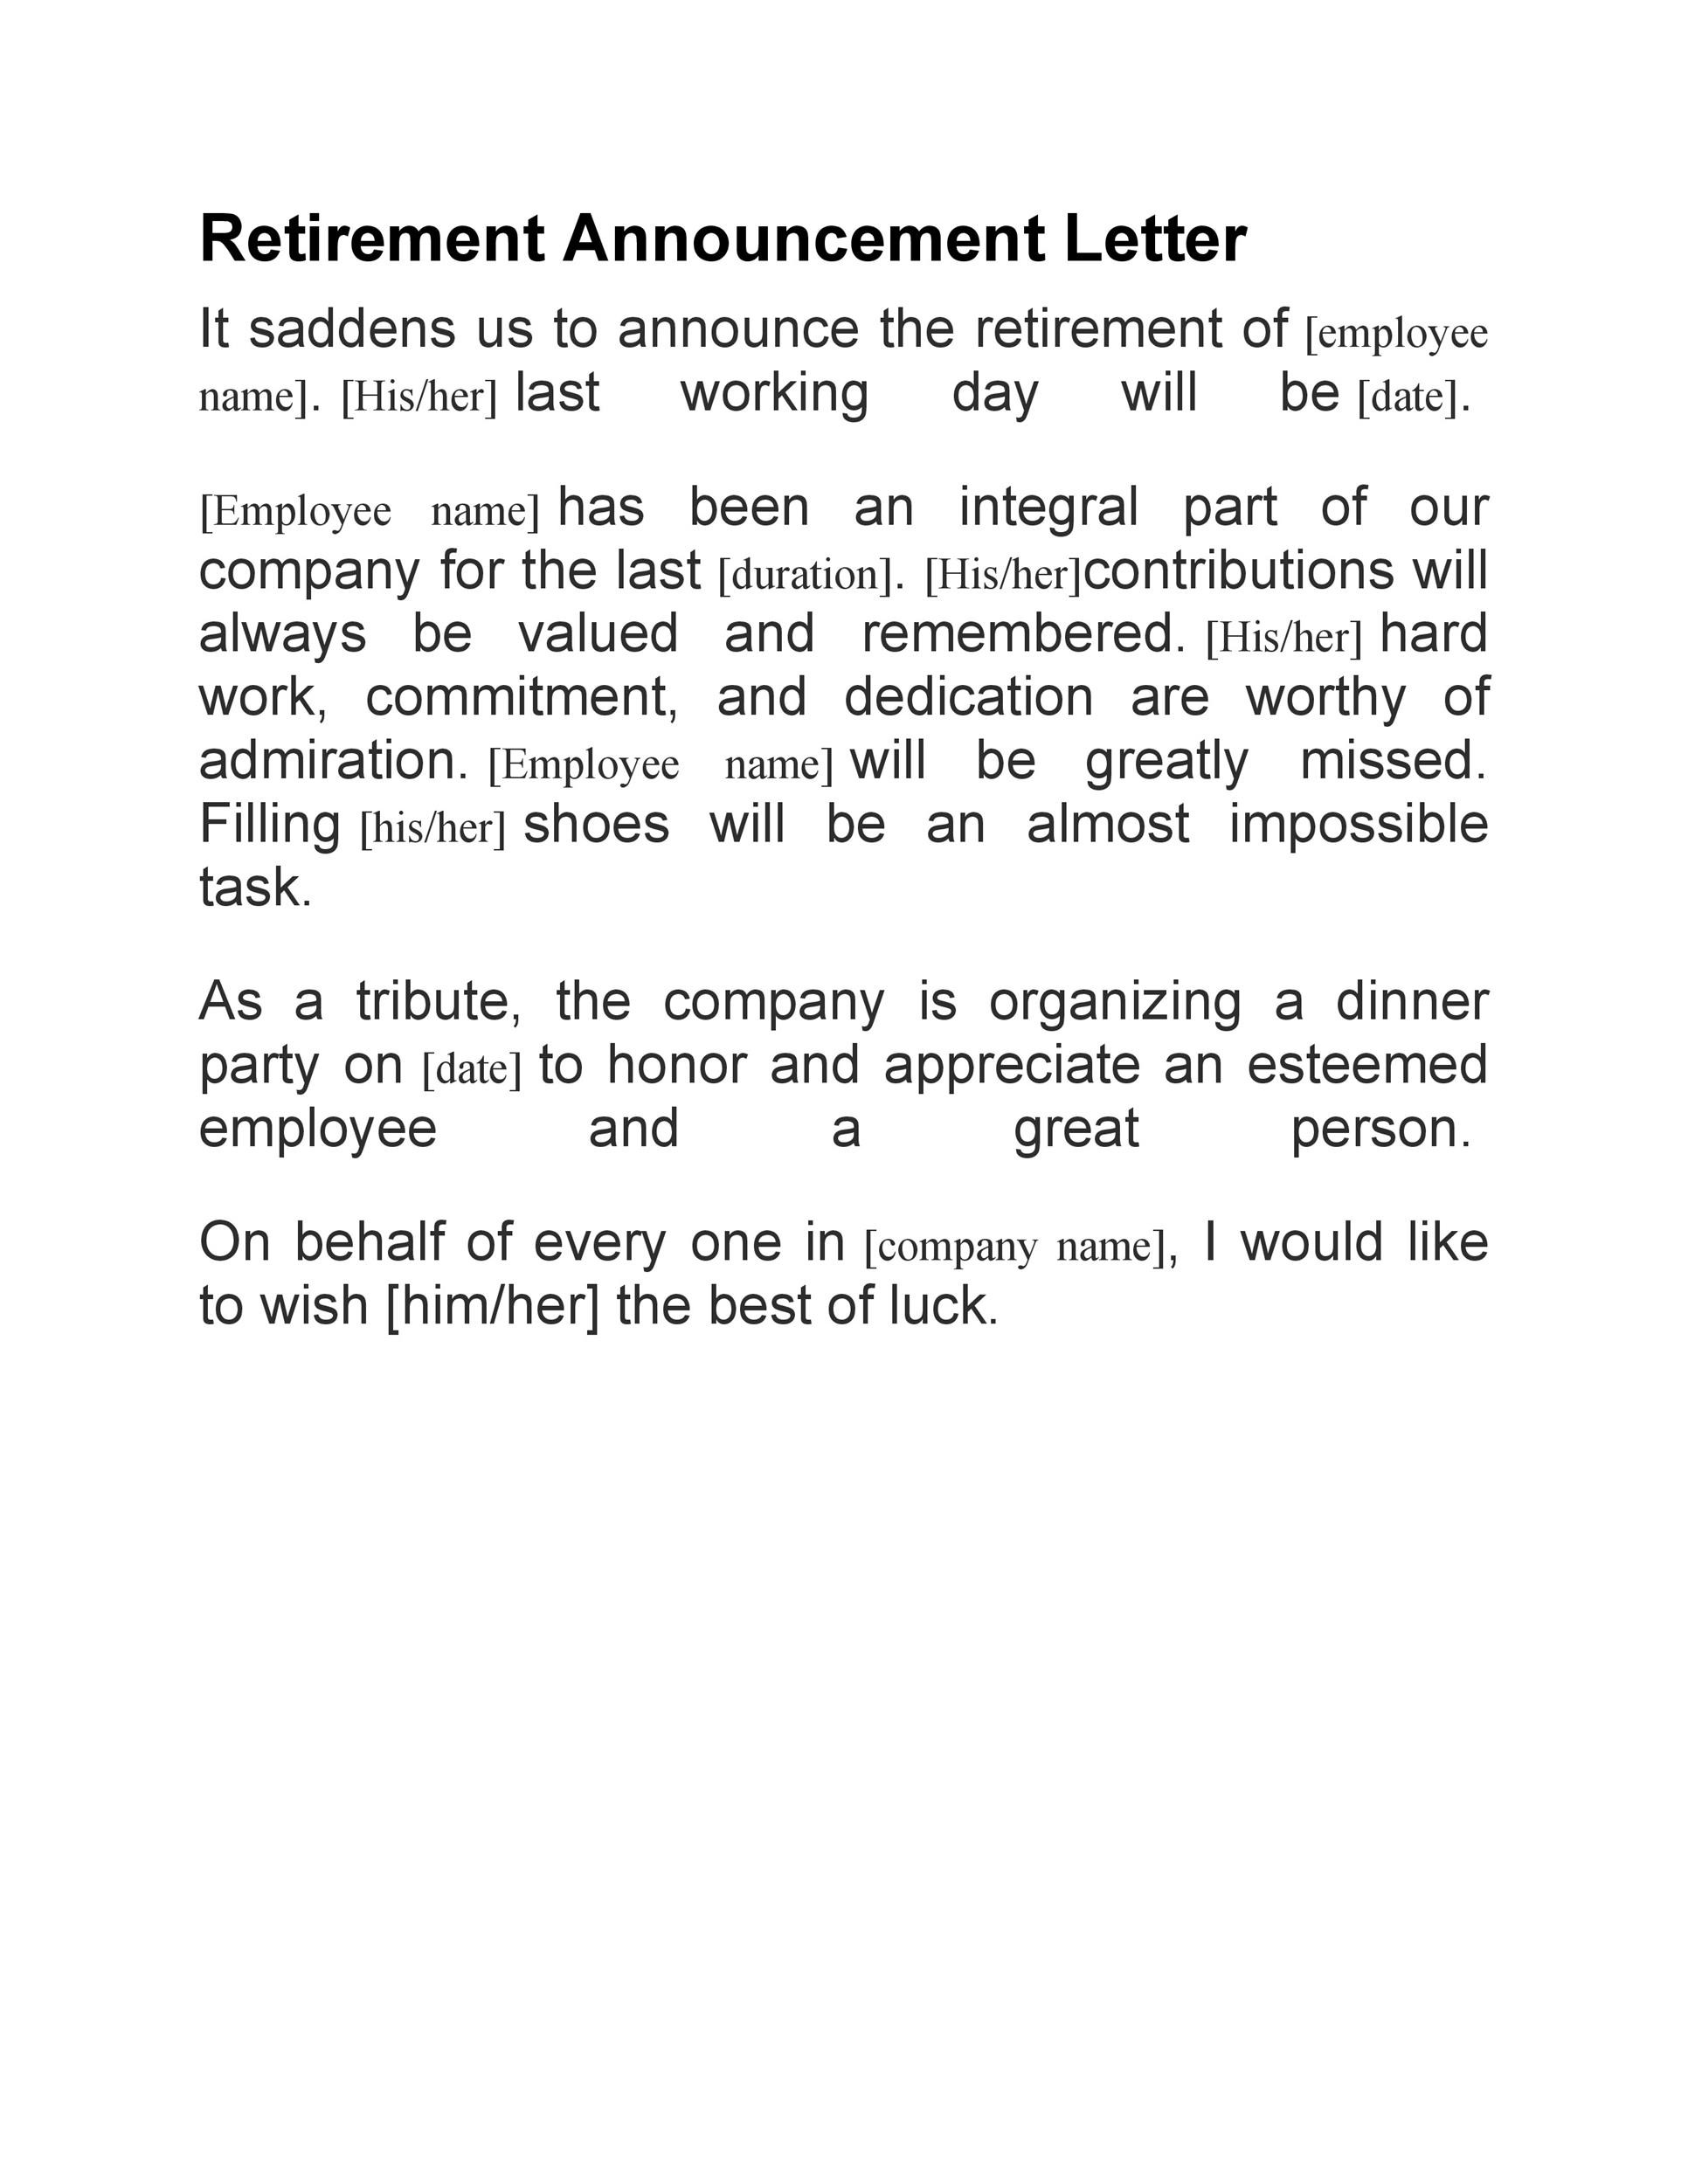 Sample Letter Announcing Employee Resignation from templatelab.com